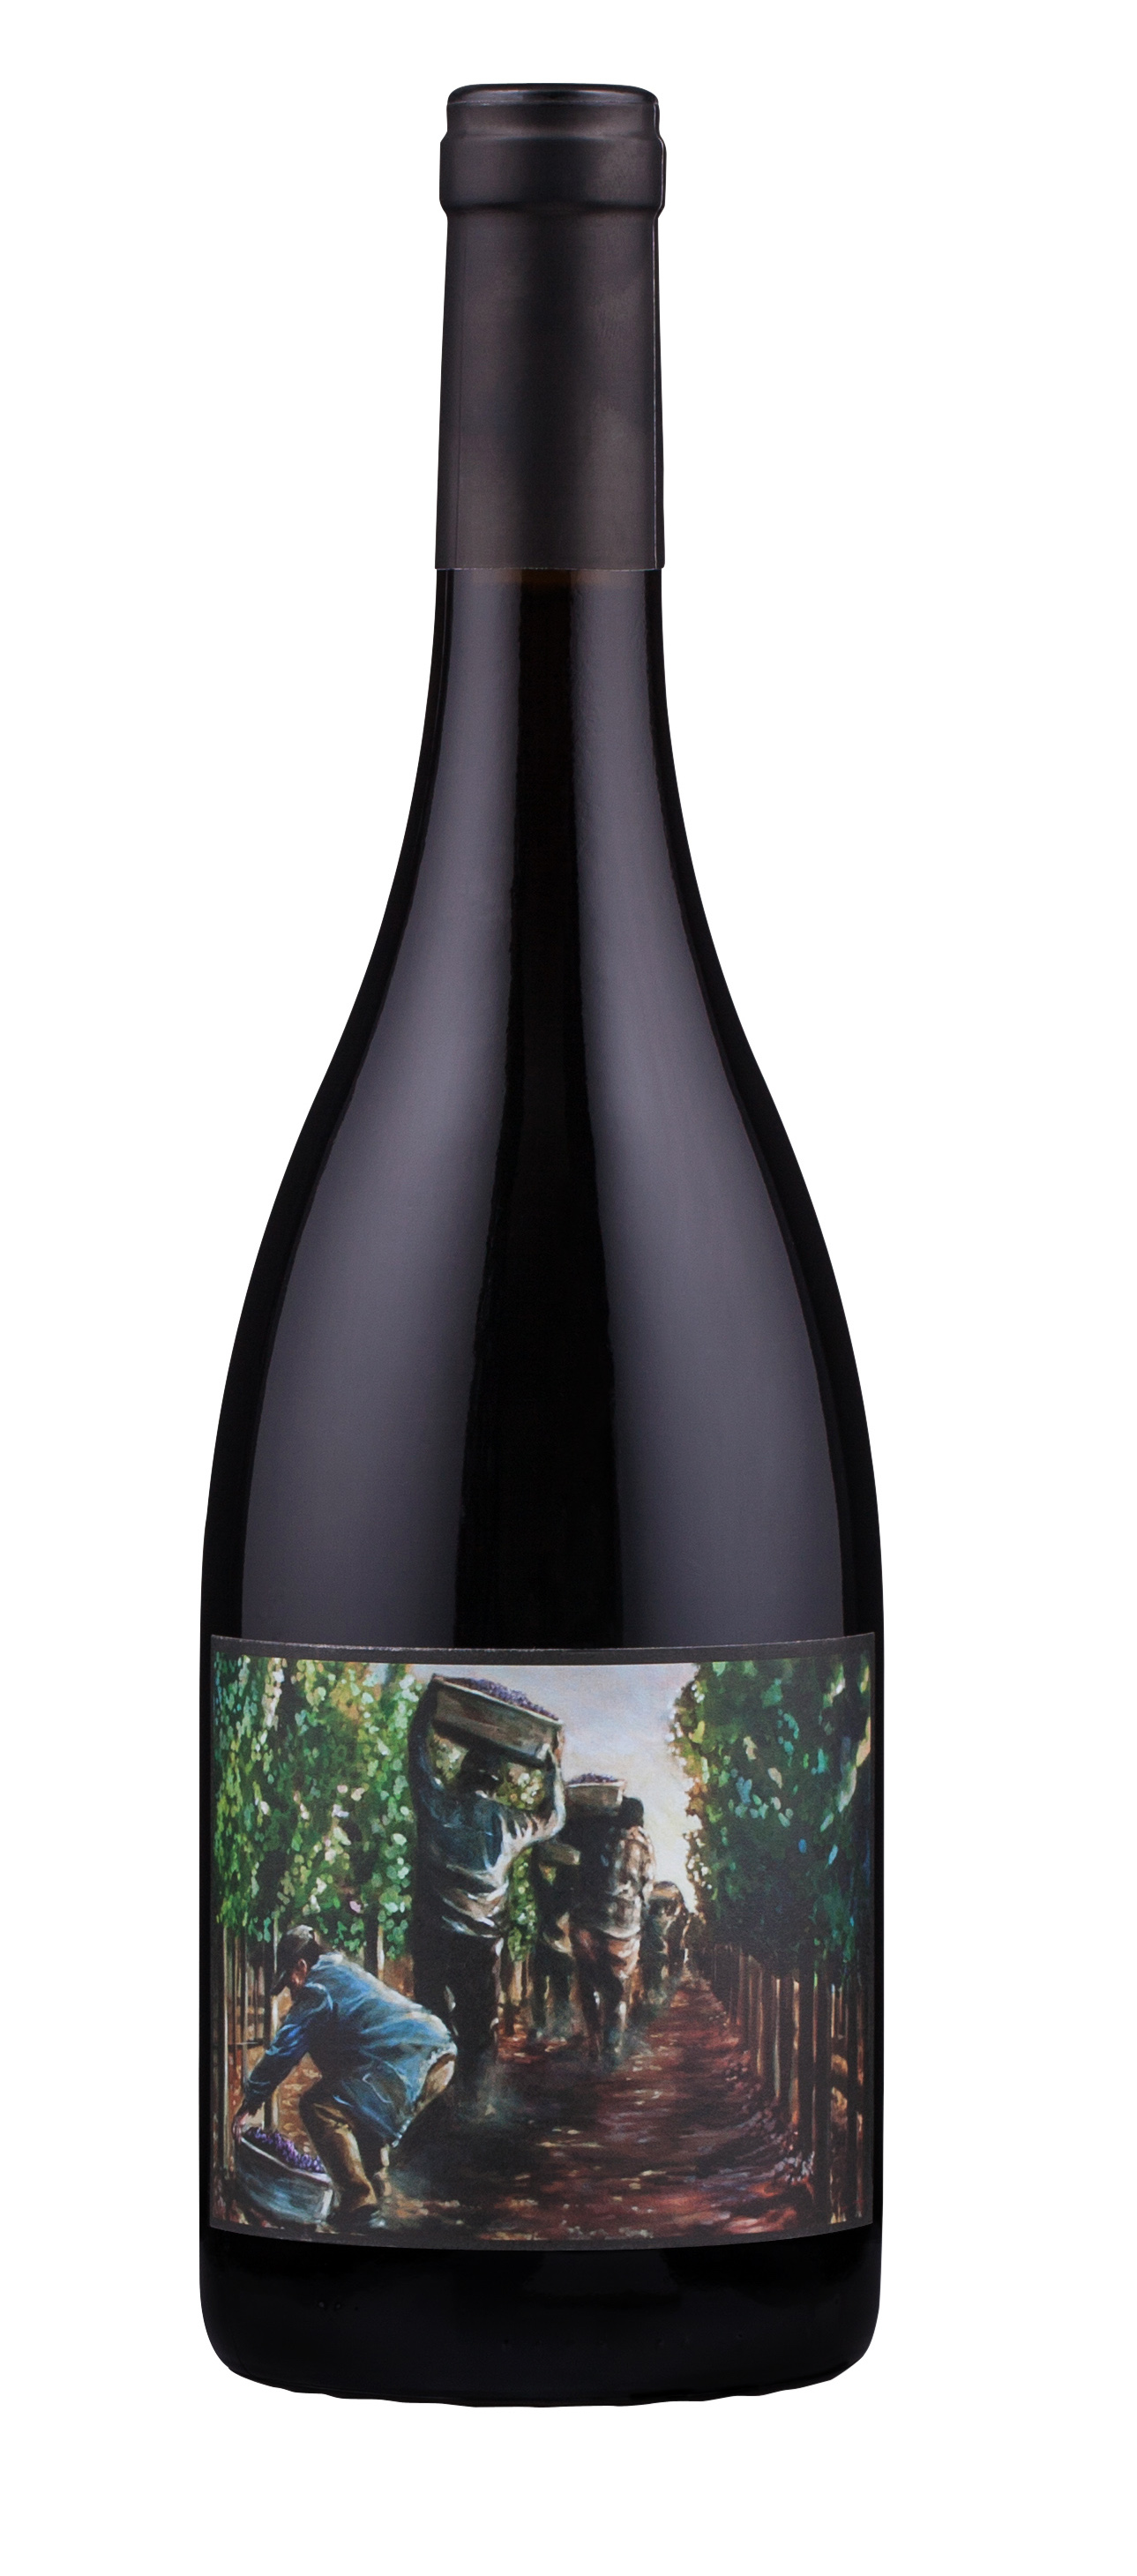 Product Image for Trahan 2018 Pinot Noir Los Carneros